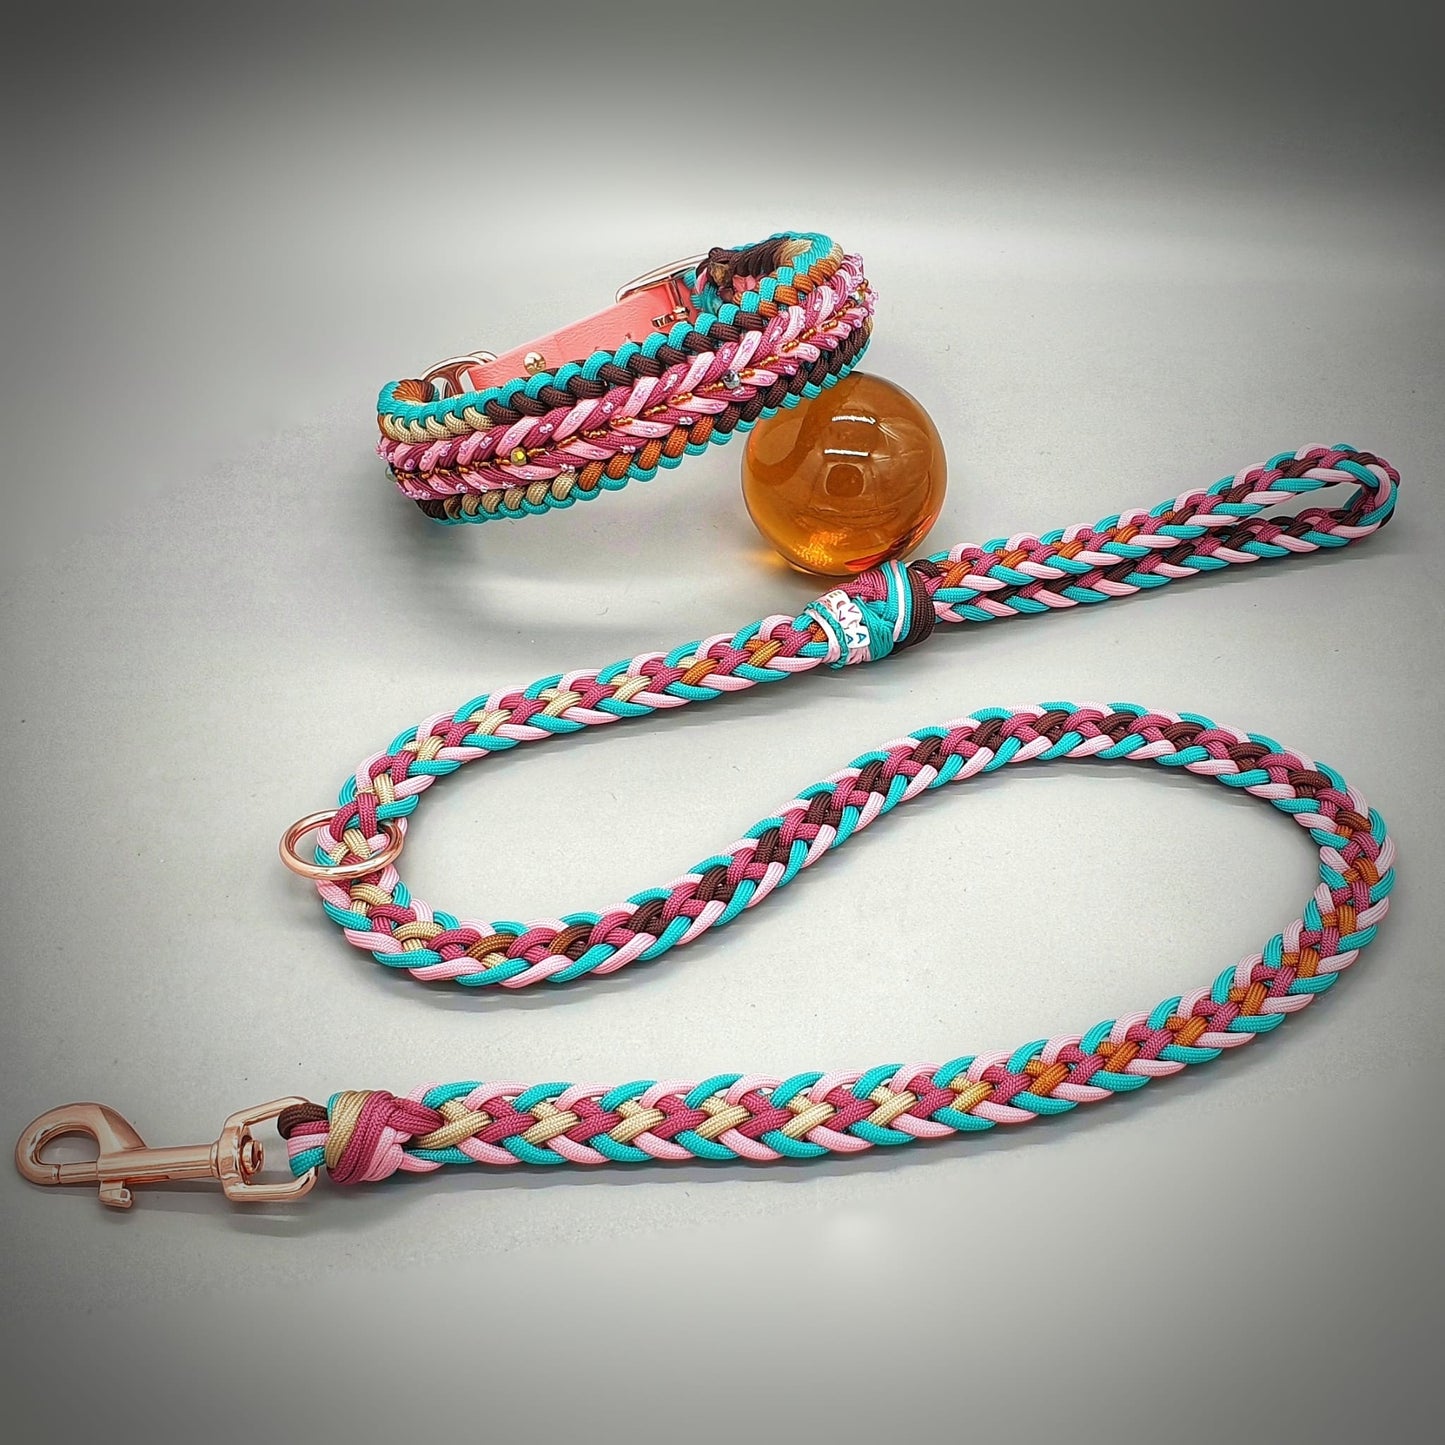 Paracord hand woven collar and leash. Exclusive design. Luxury accessories for your Pet.